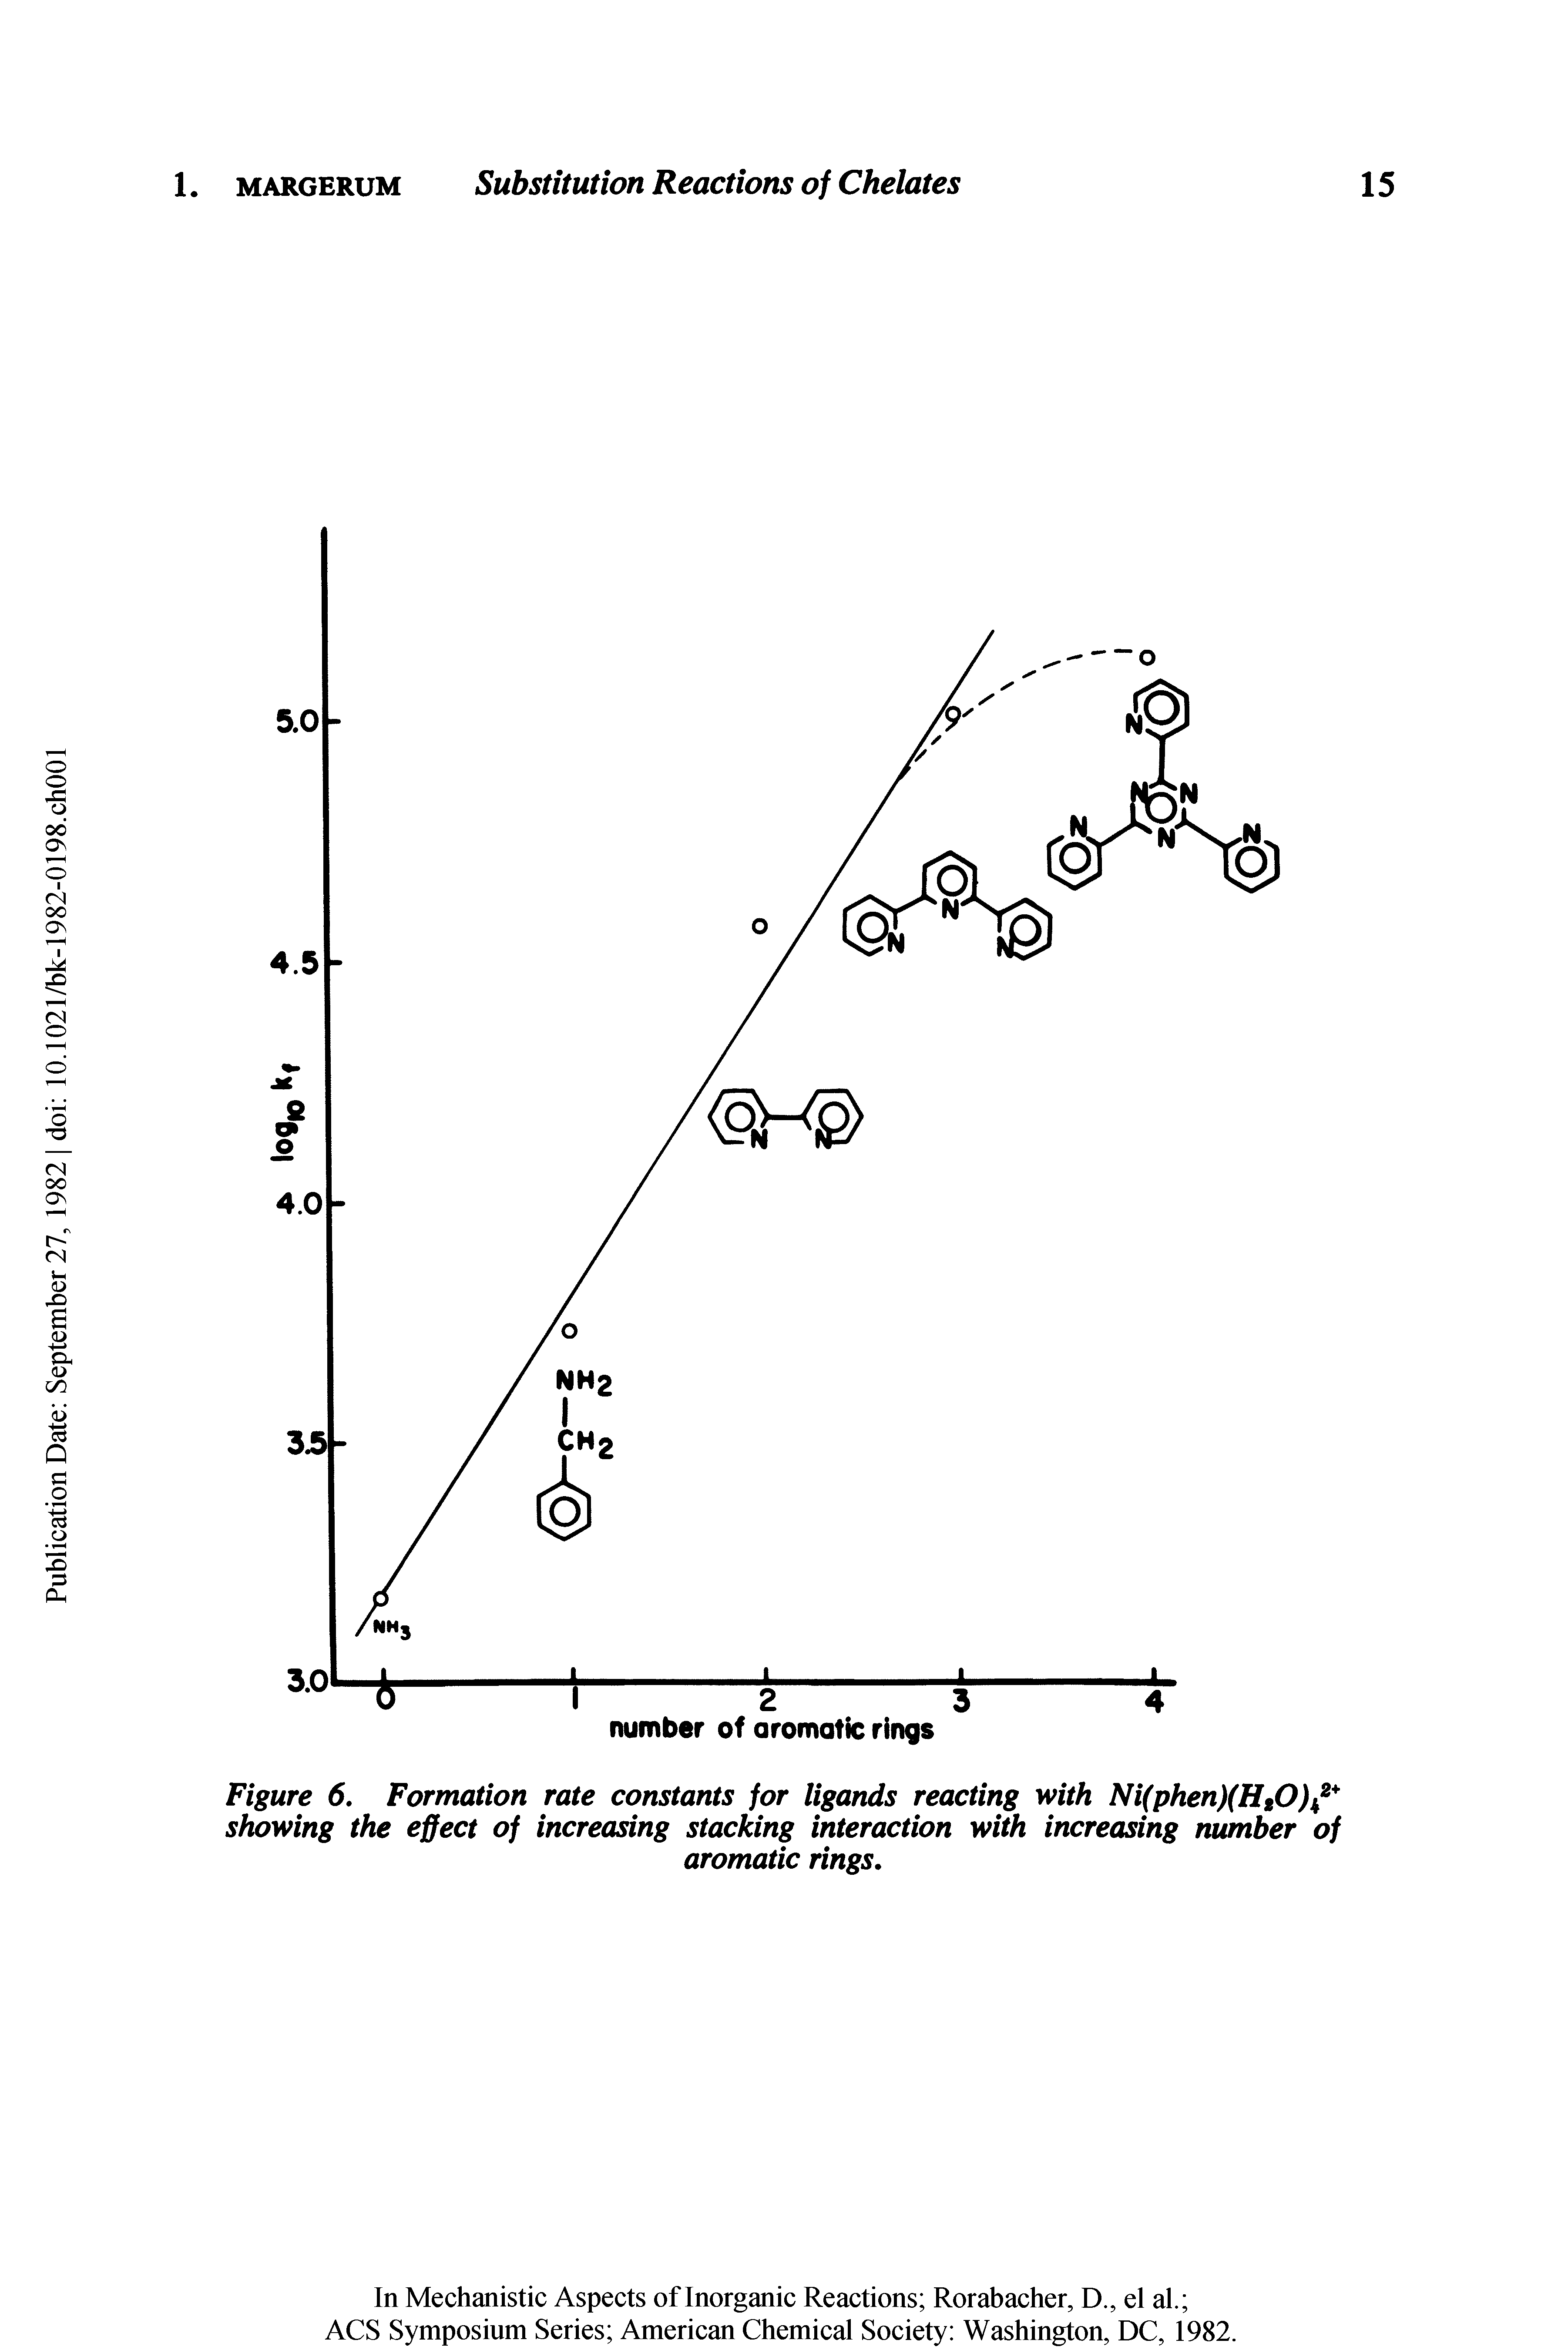 Figure 6. Formation rate constants for ligands reacting with Ni(phen)(HtO)A2 showing the effect of increasing stacking interaction with increasing number of...